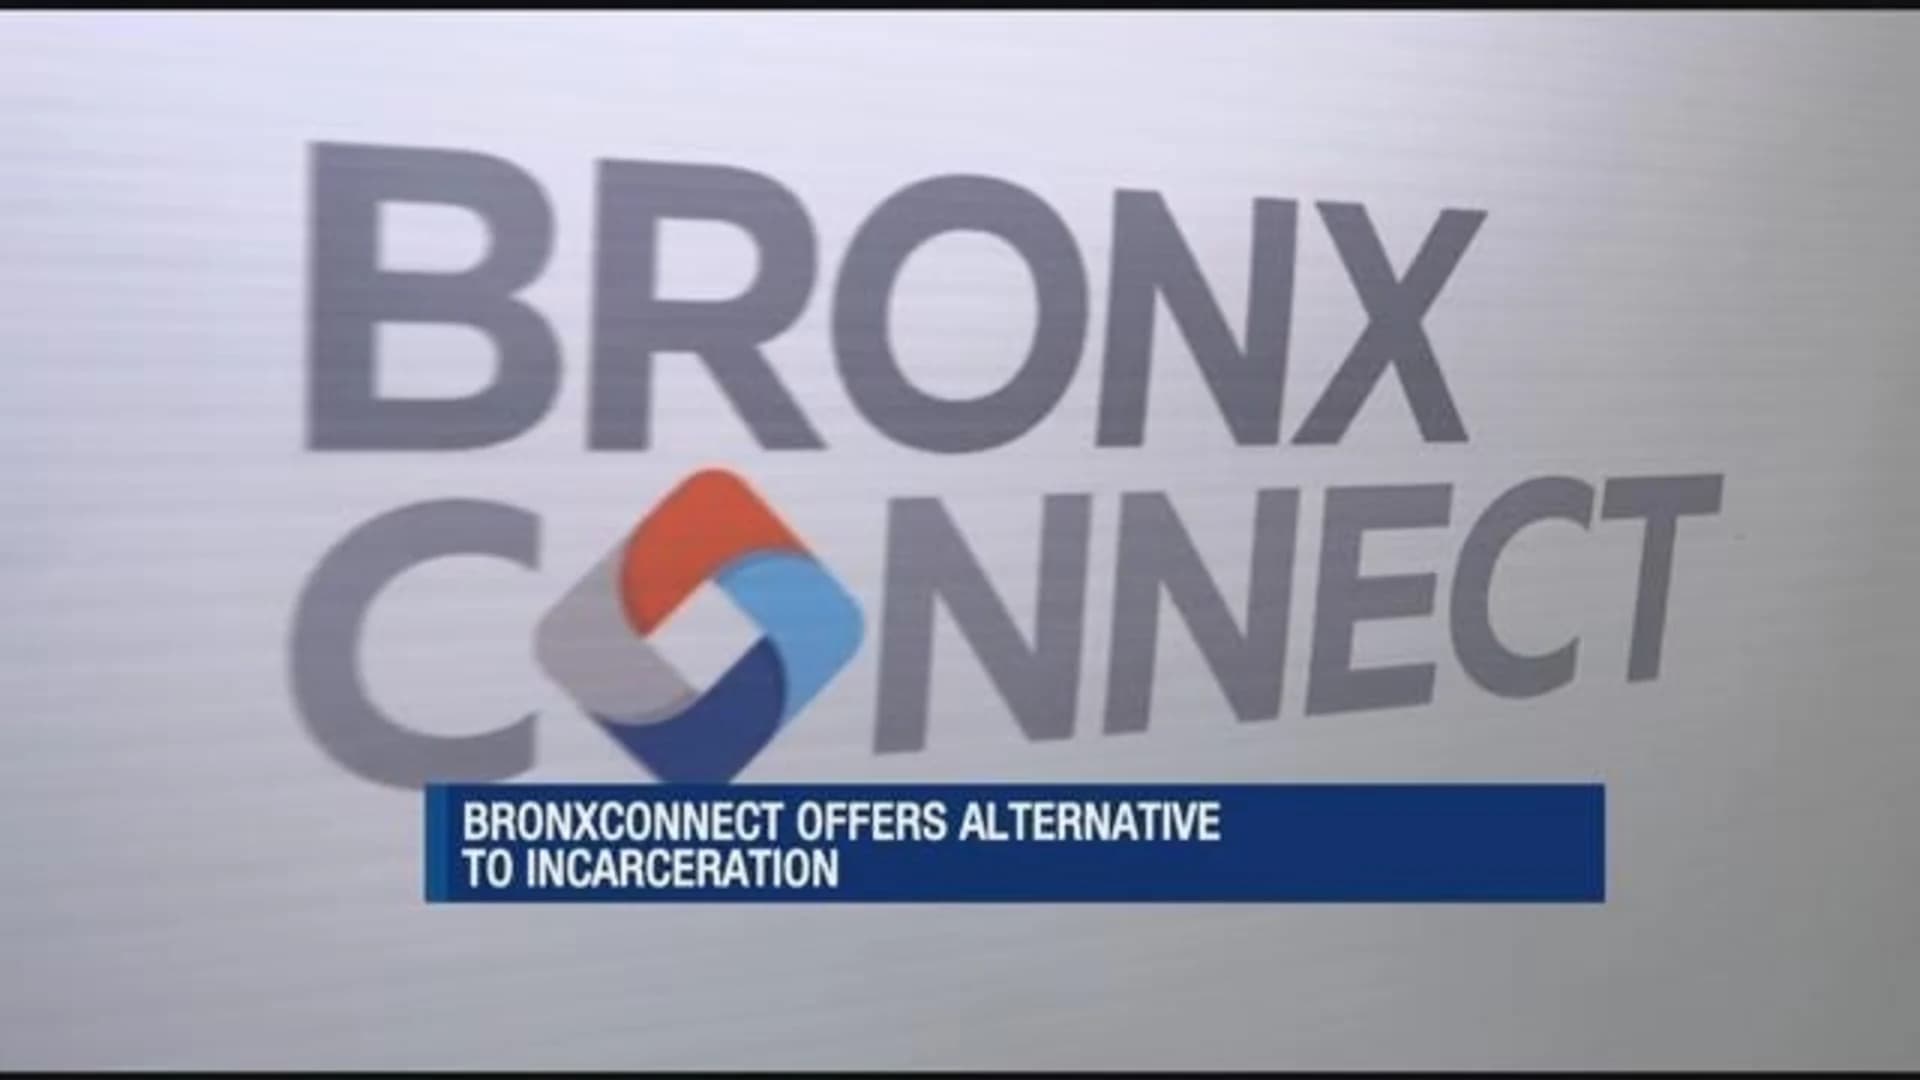 BronxConnect focuses on turning around lives of those at risk